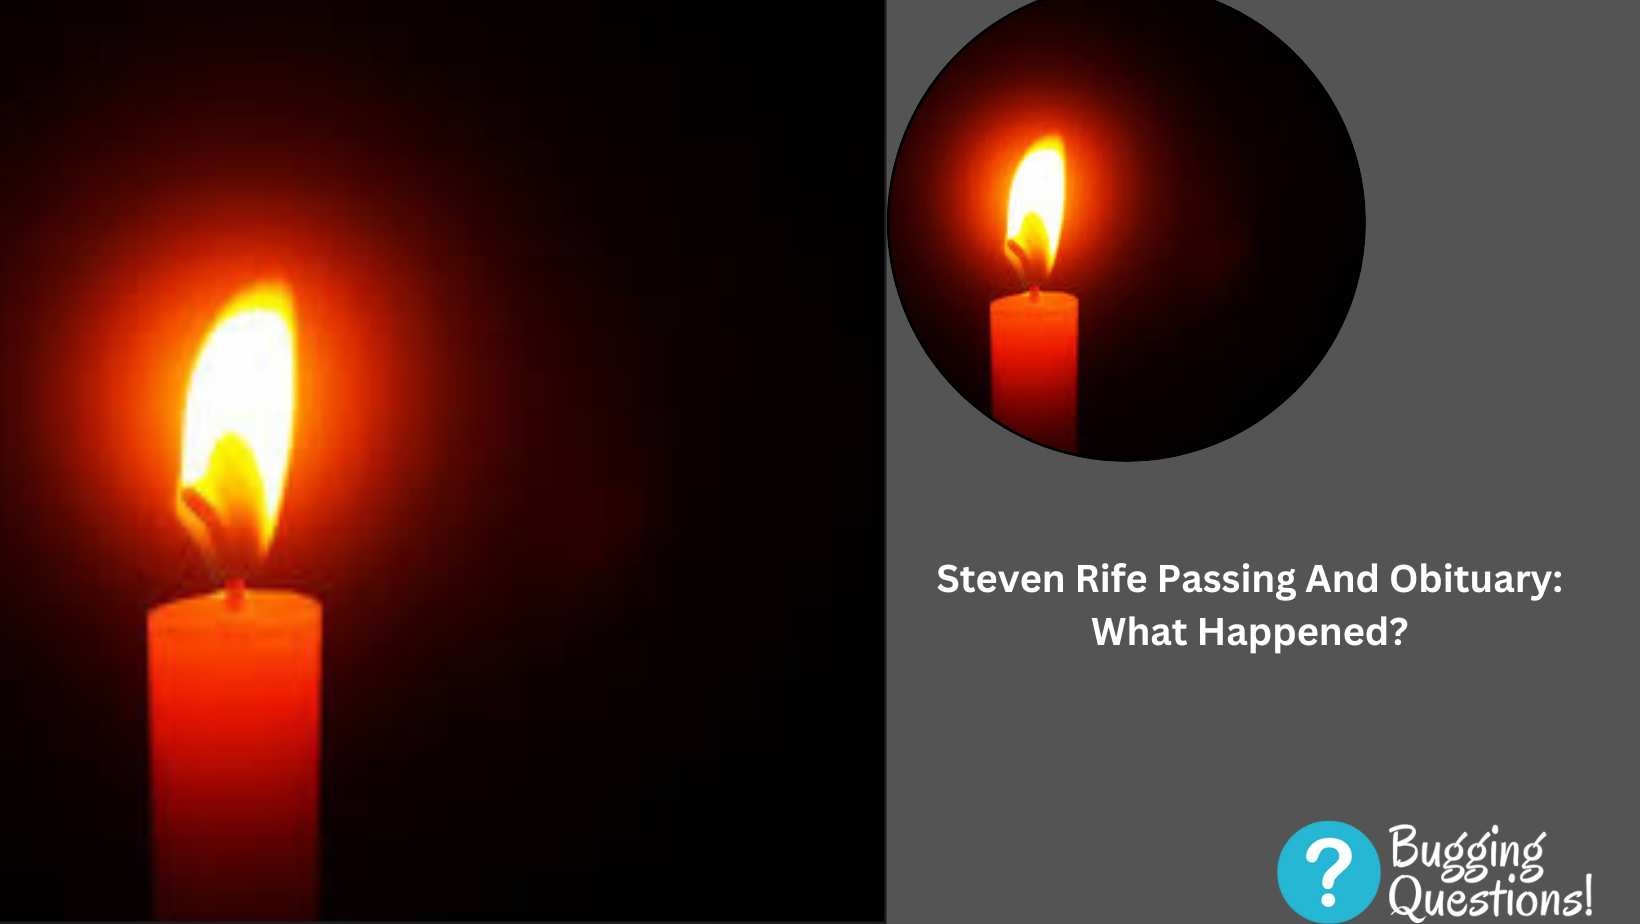 Steven Rife Passing And Obituary: What Happened?